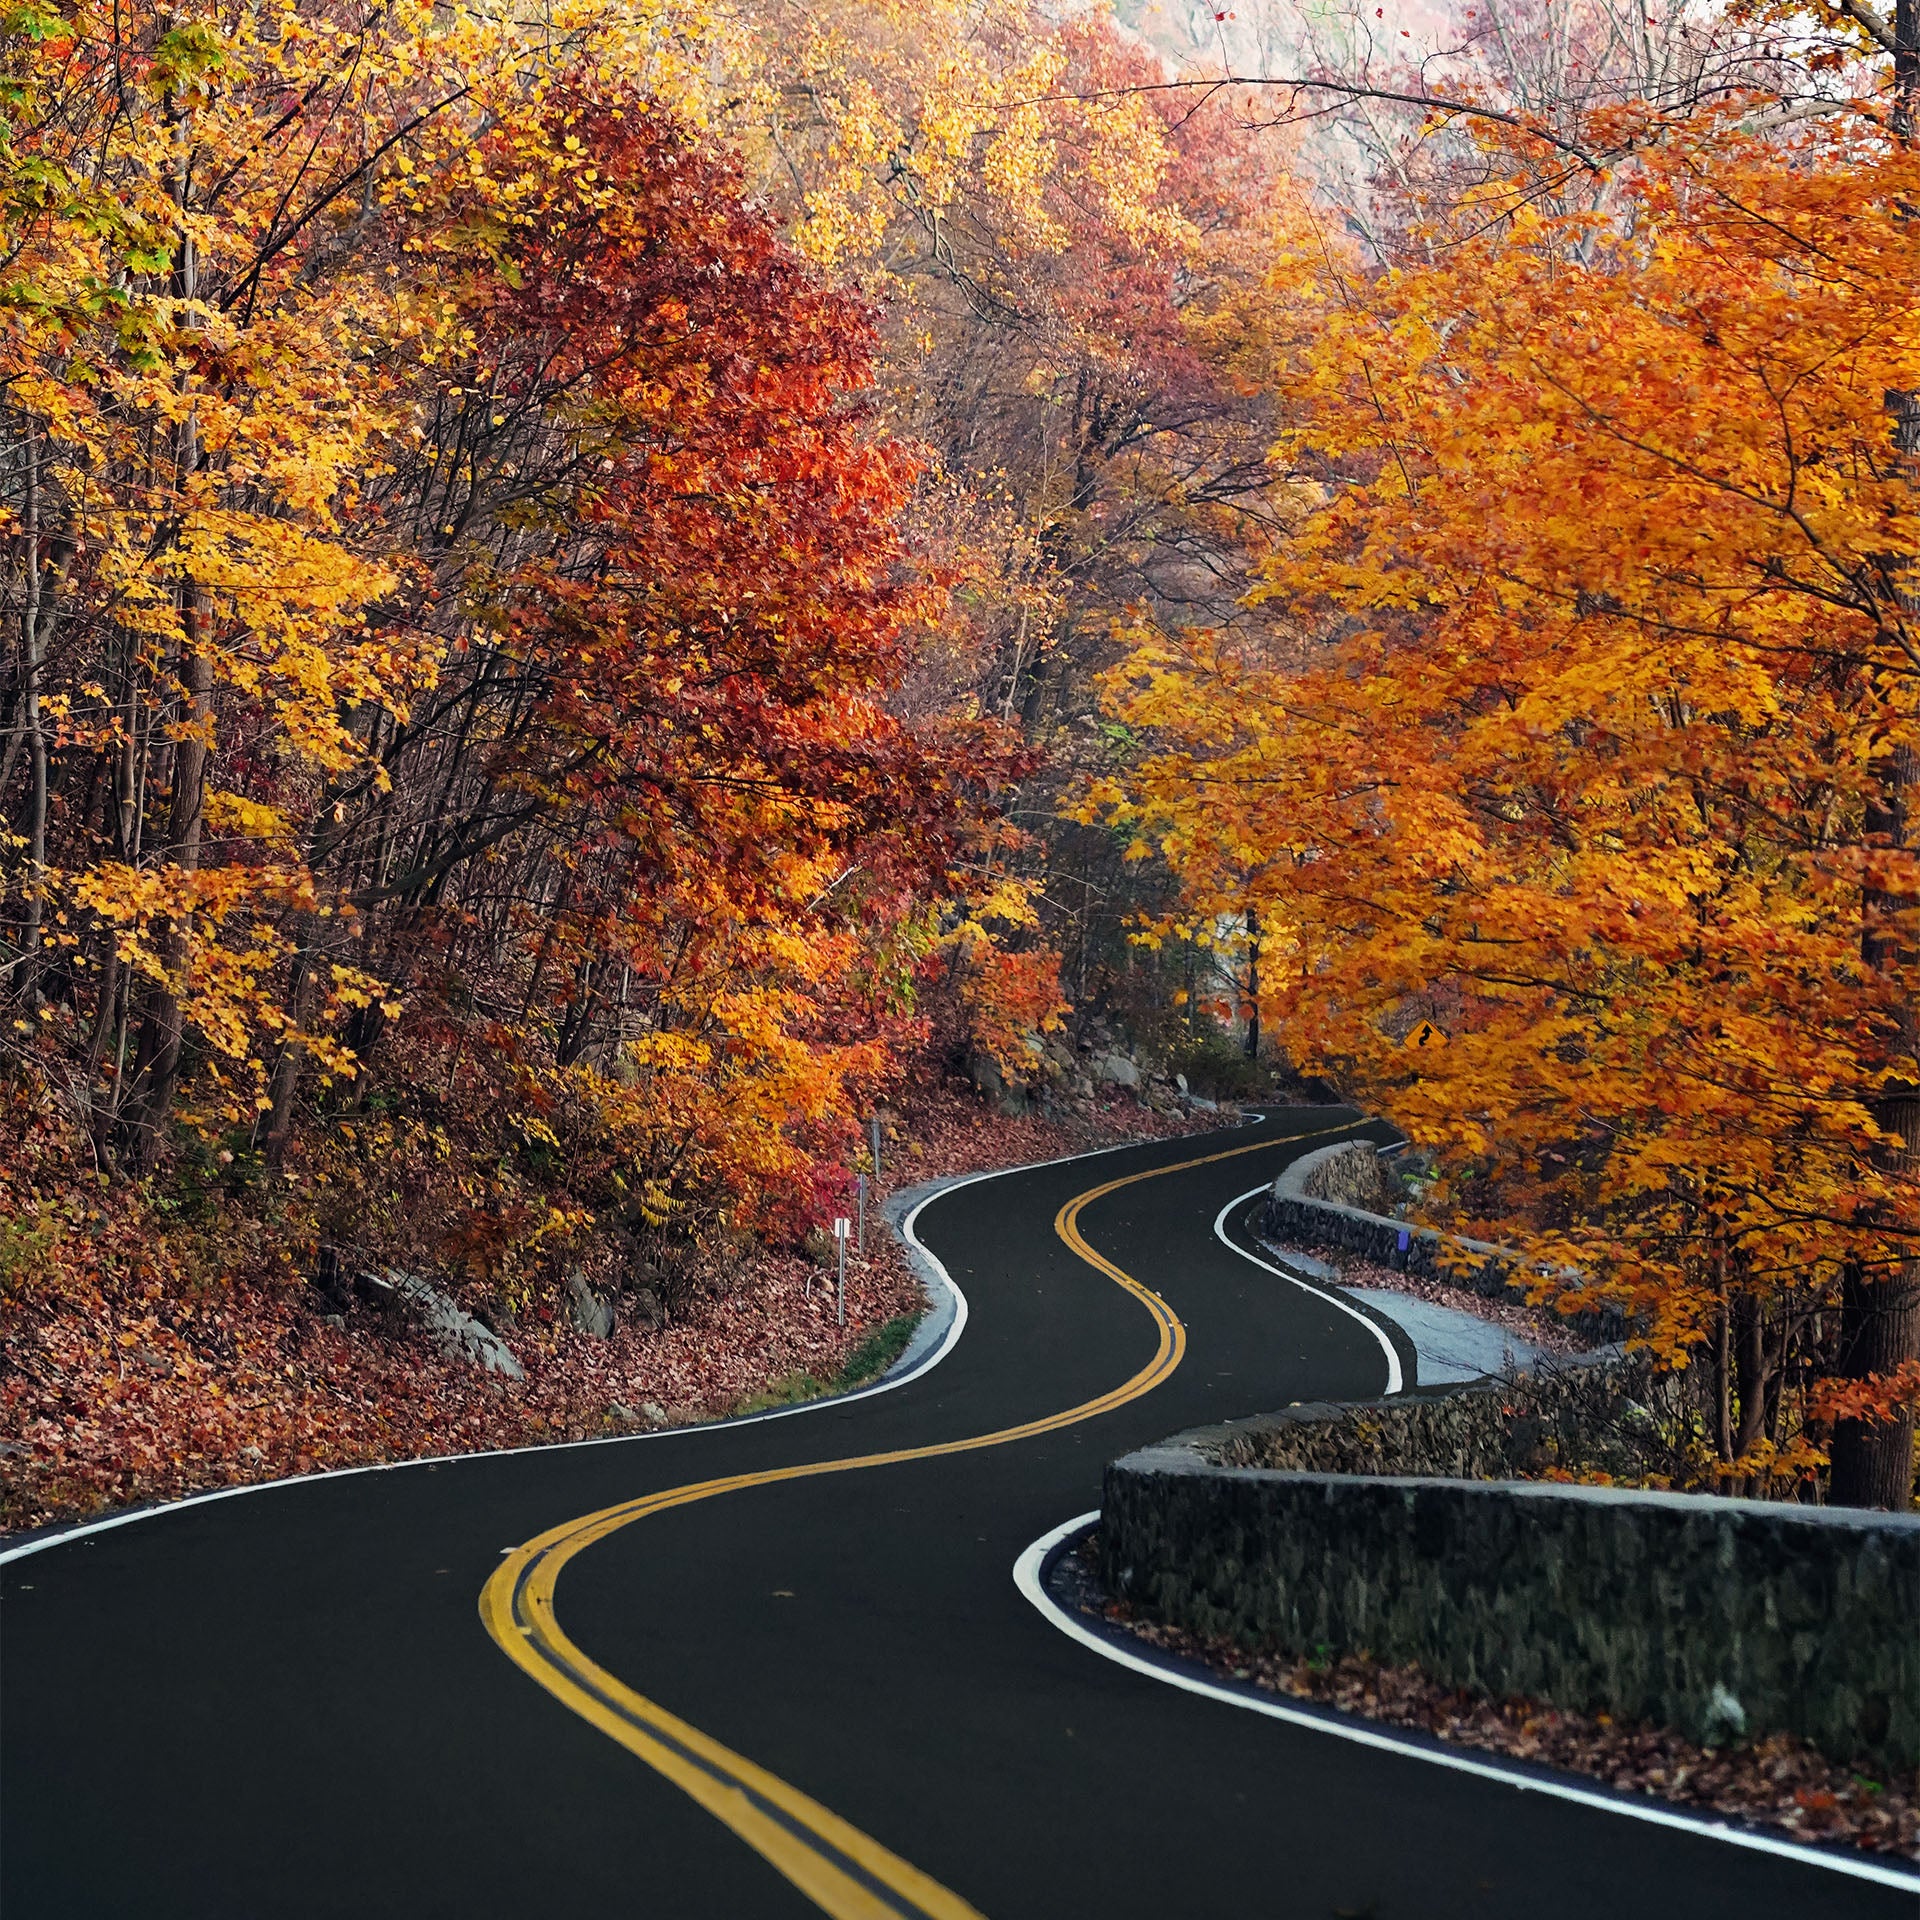 Fall foliage surrounds a winding road in the Northeast USA.